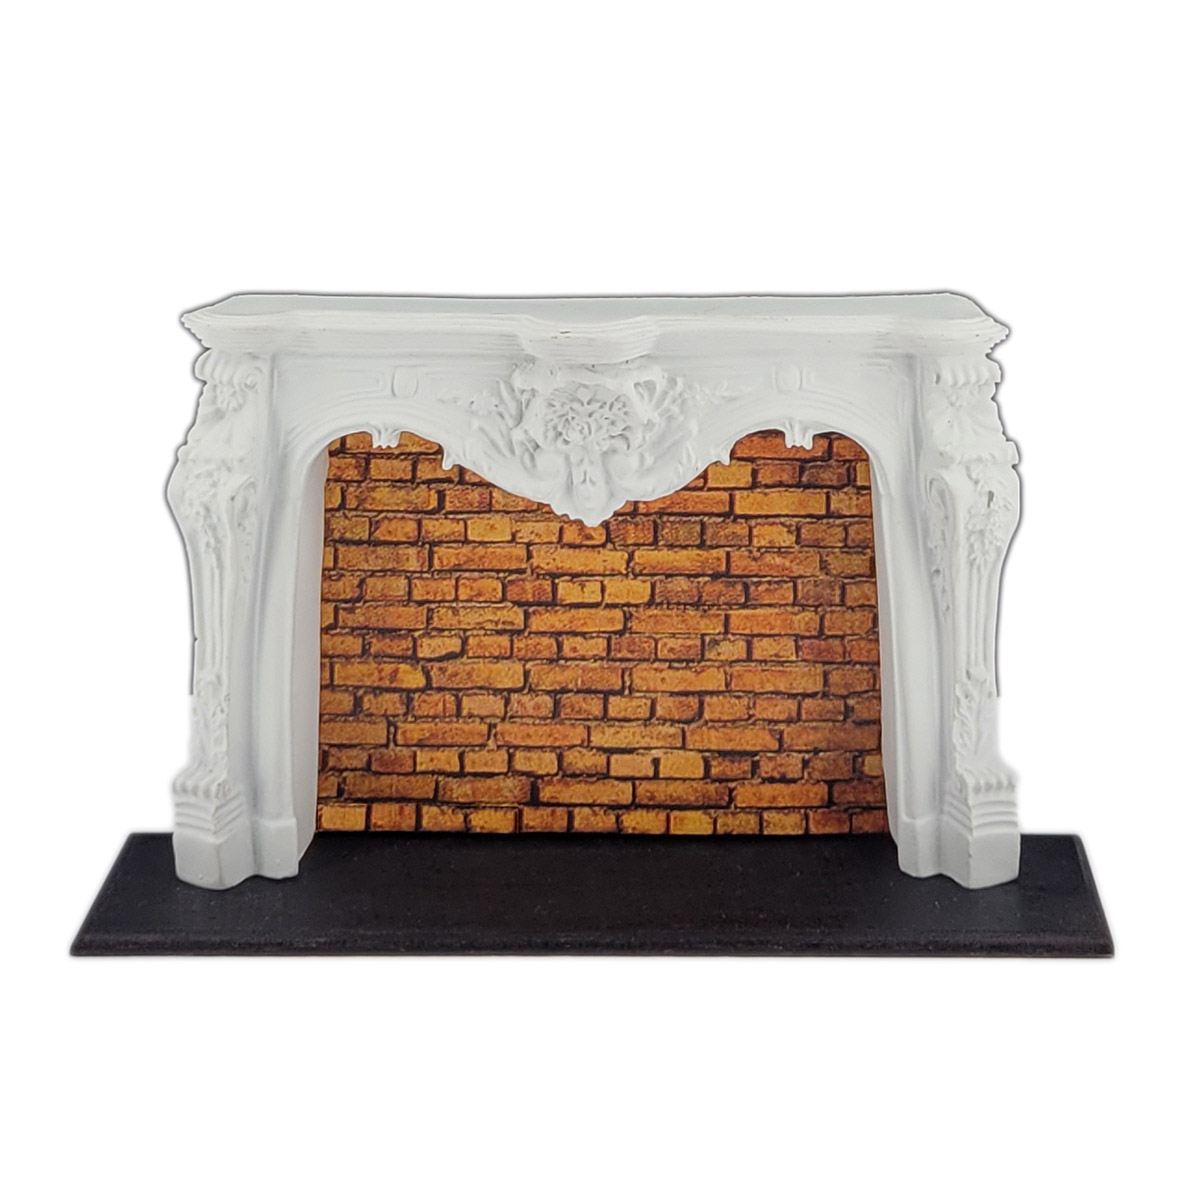 Rococo fireplace mantle　ロココ調暖炉